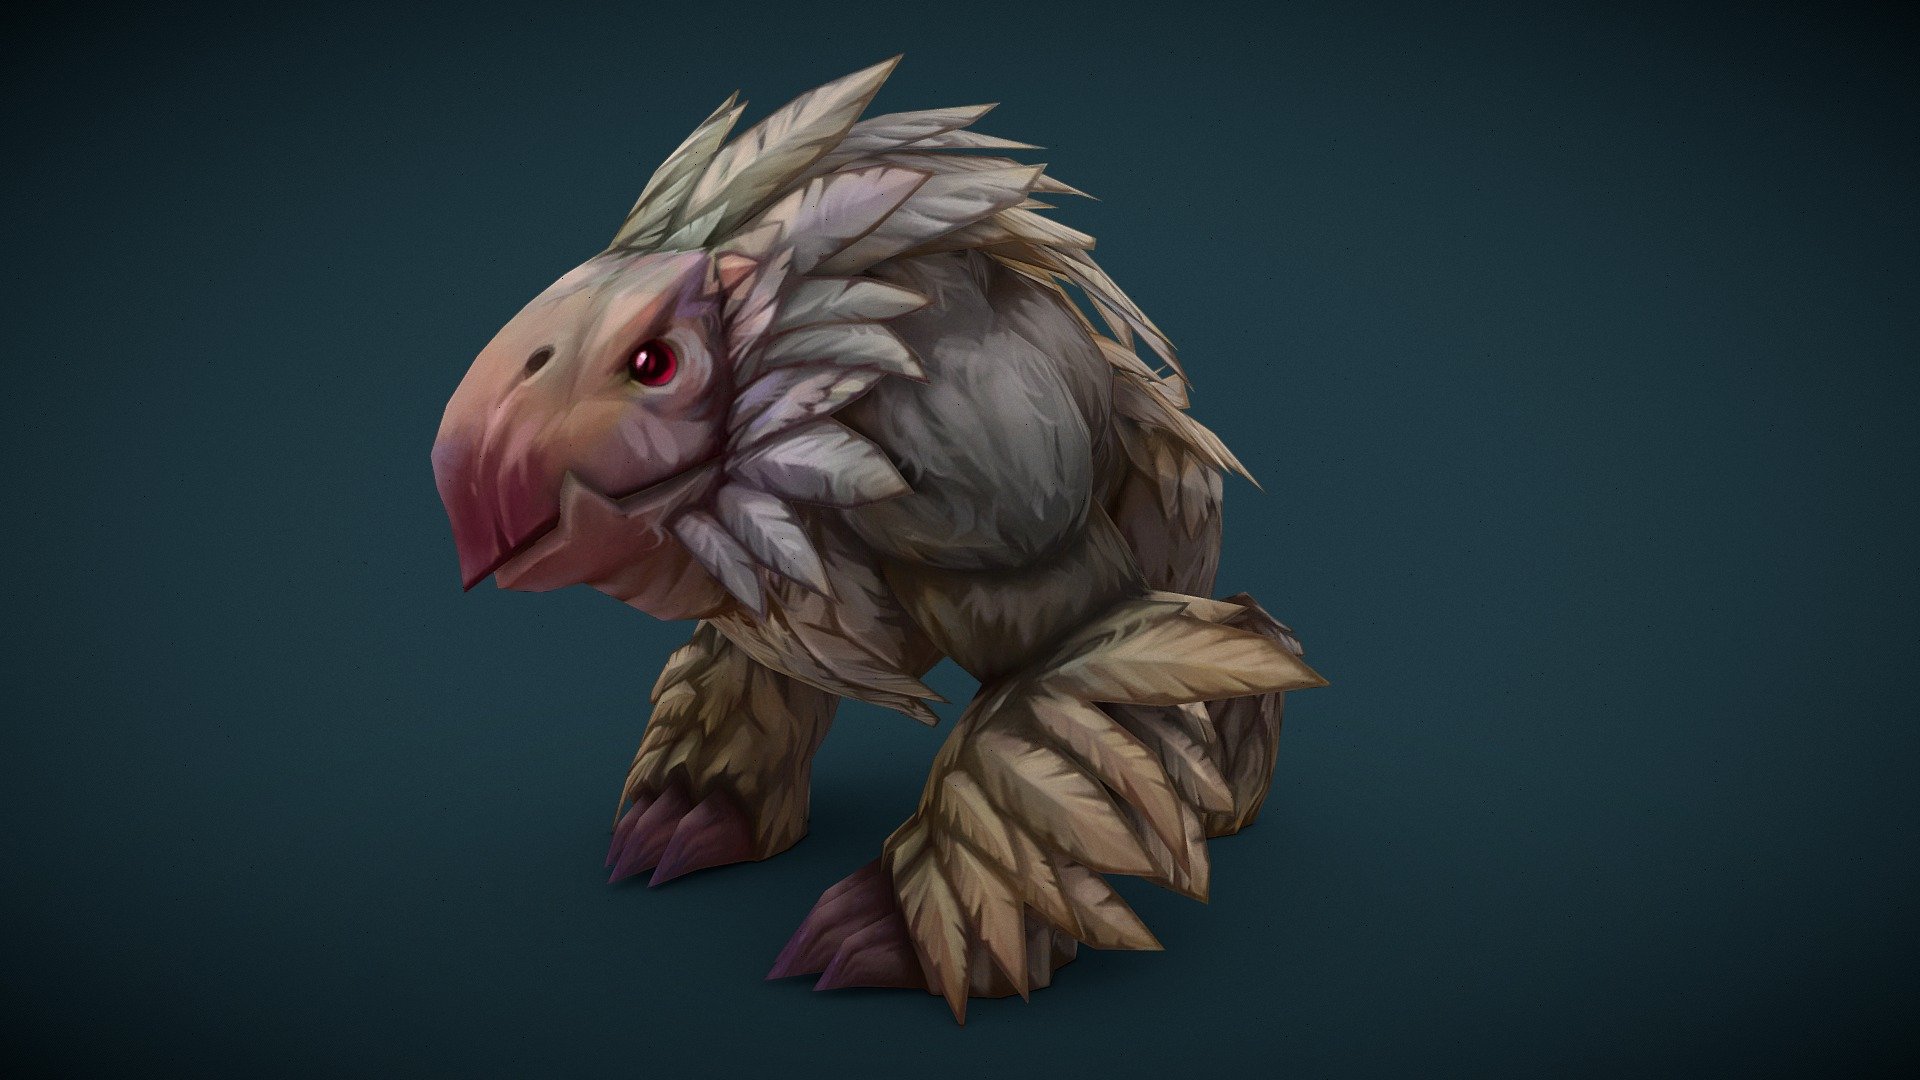 PREDATOR BEAR

albino parrot bear :D

Softwares: Maya and Adobe Photoshop.

Mobile game asset:
Low poly 2.3k Tris
Texture 1024x1024
Without alpha
HandPainted - Predator Bear Albino - 3D model by Andrey (@fruitmamba) 3d model